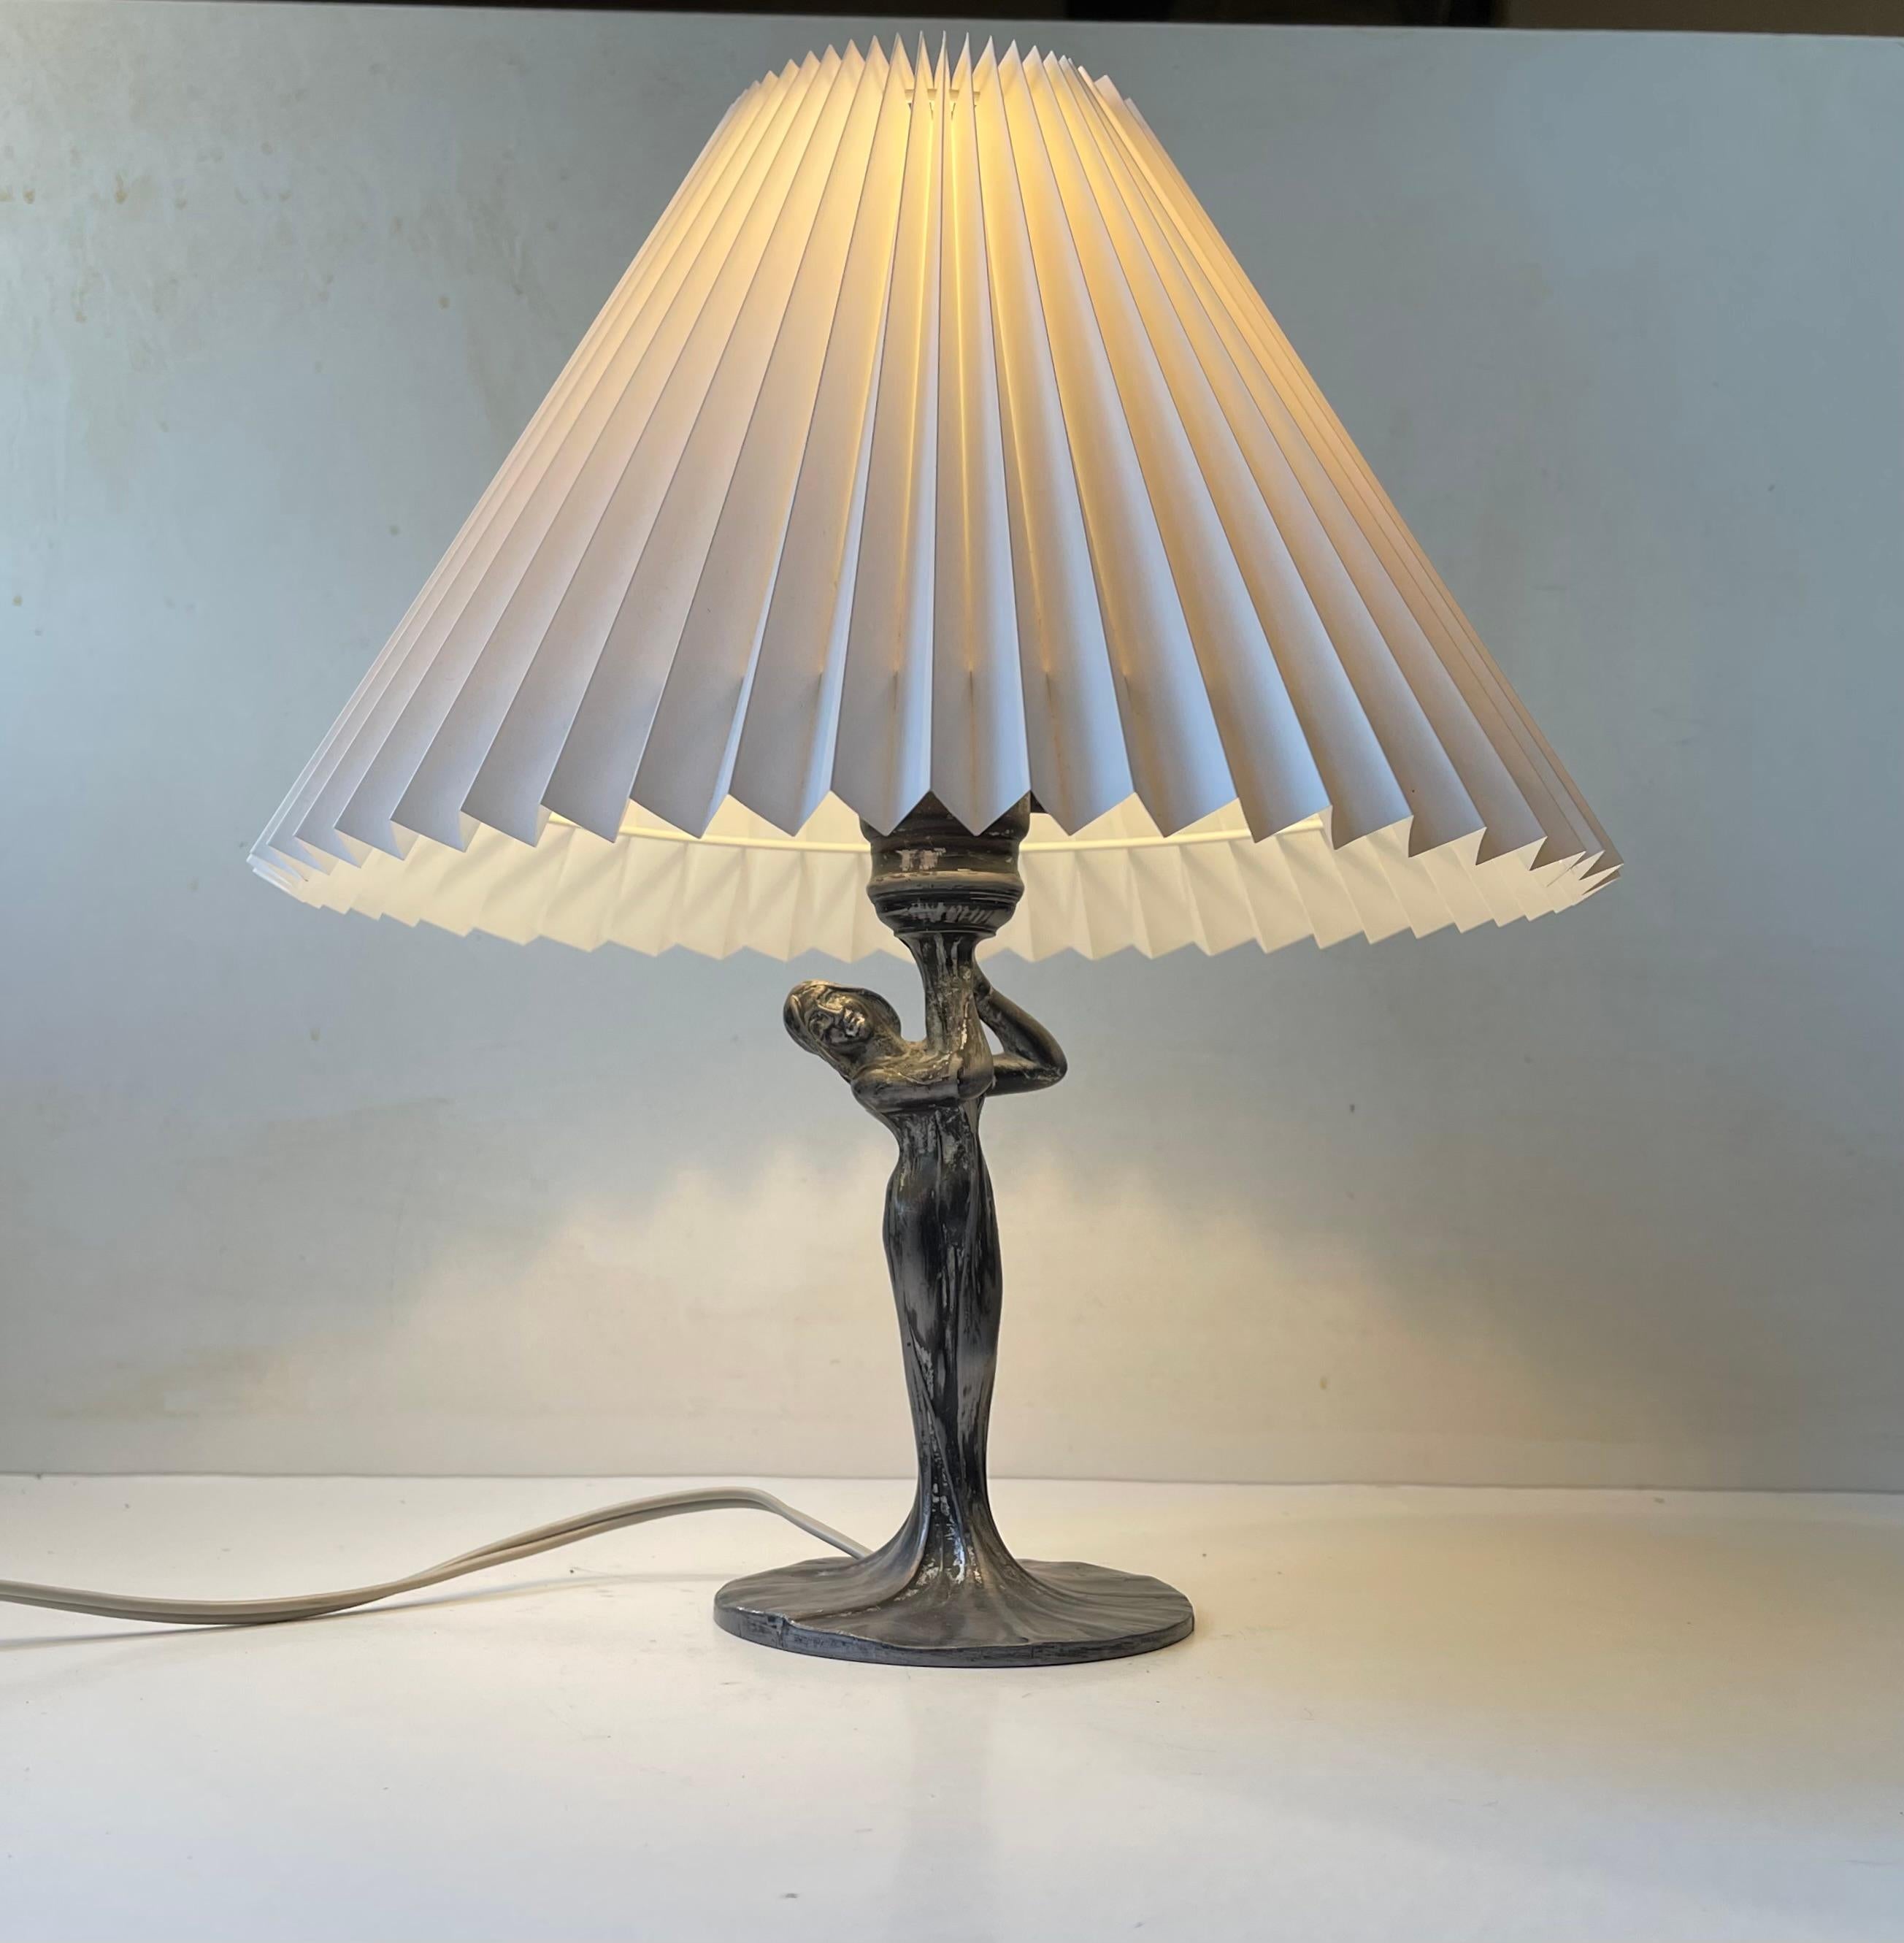 French Art Deco 'Dress' Table Lamp in Pewter, 1930s For Sale 3